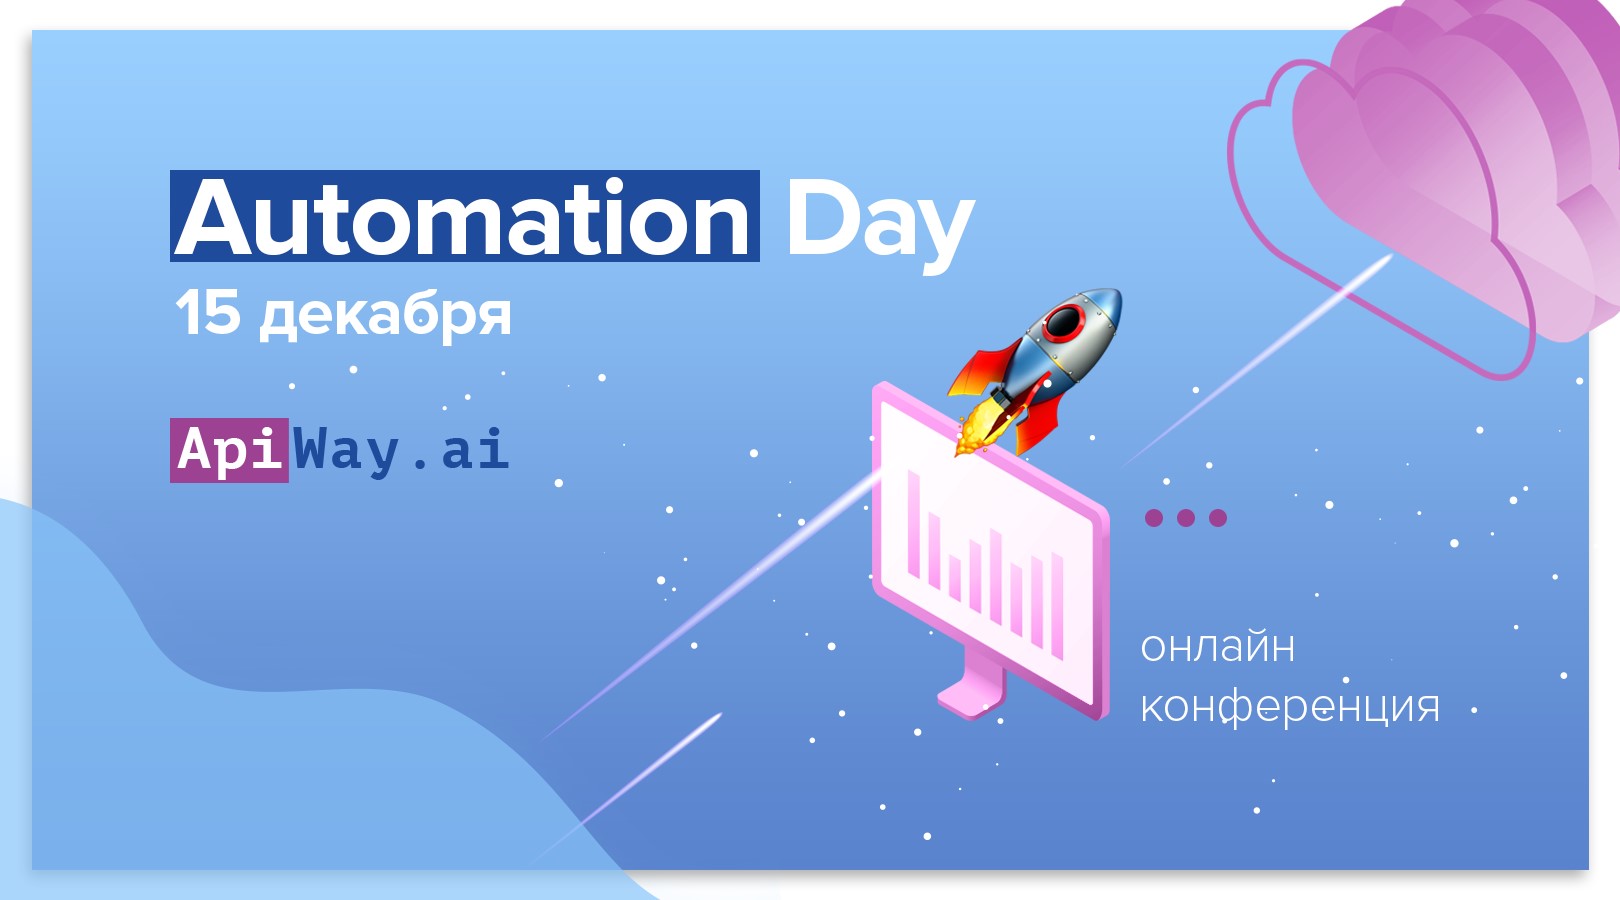 Automation Day